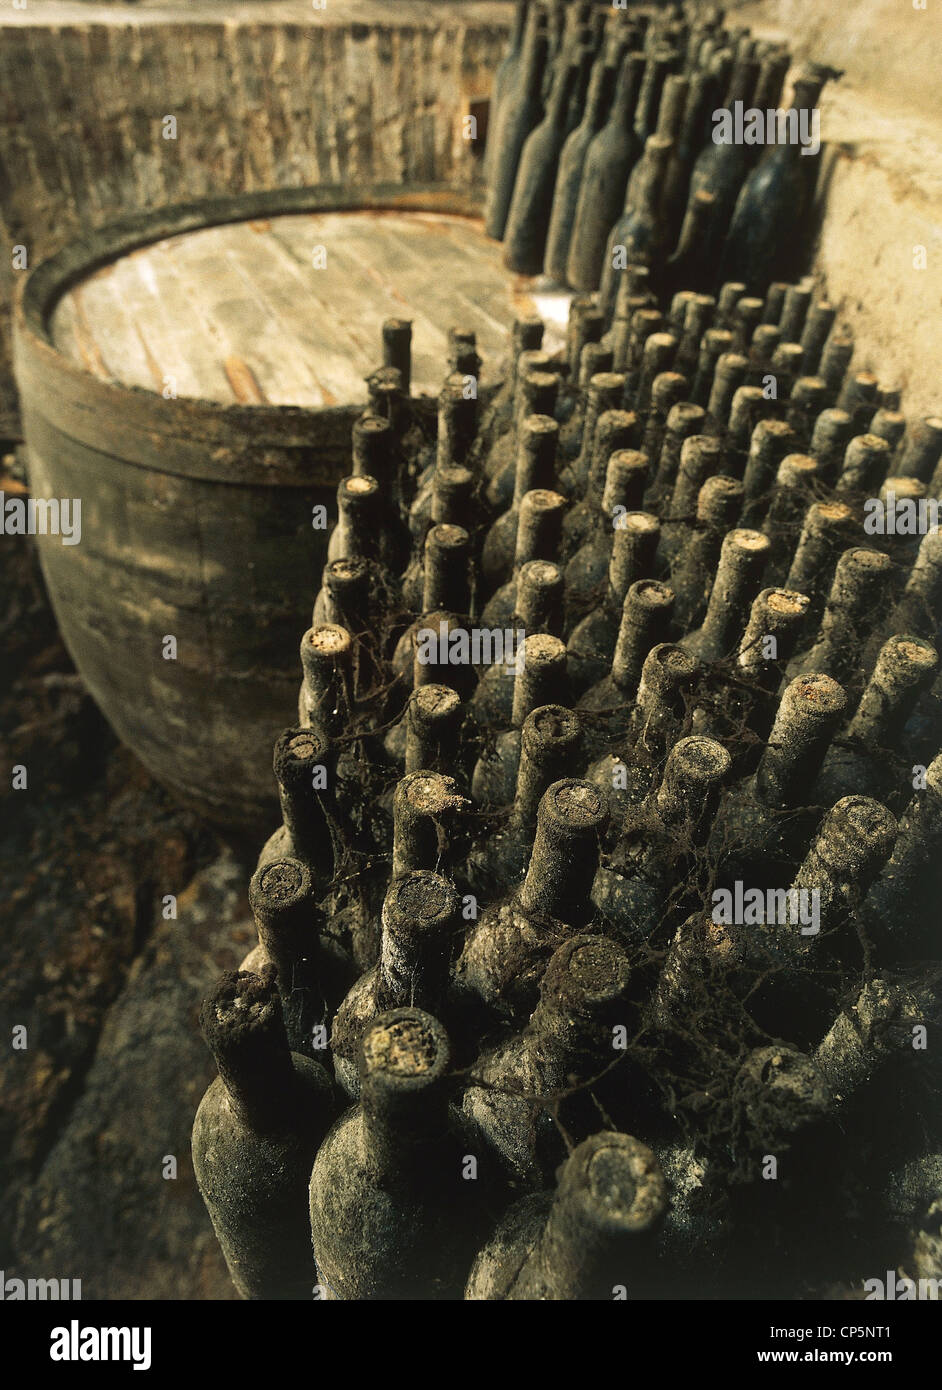 Tuscany - Maremma - Massa Marittima (Gr). The aging of bottles and barrels in the caves of the winery Moris Farms. Stock Photo